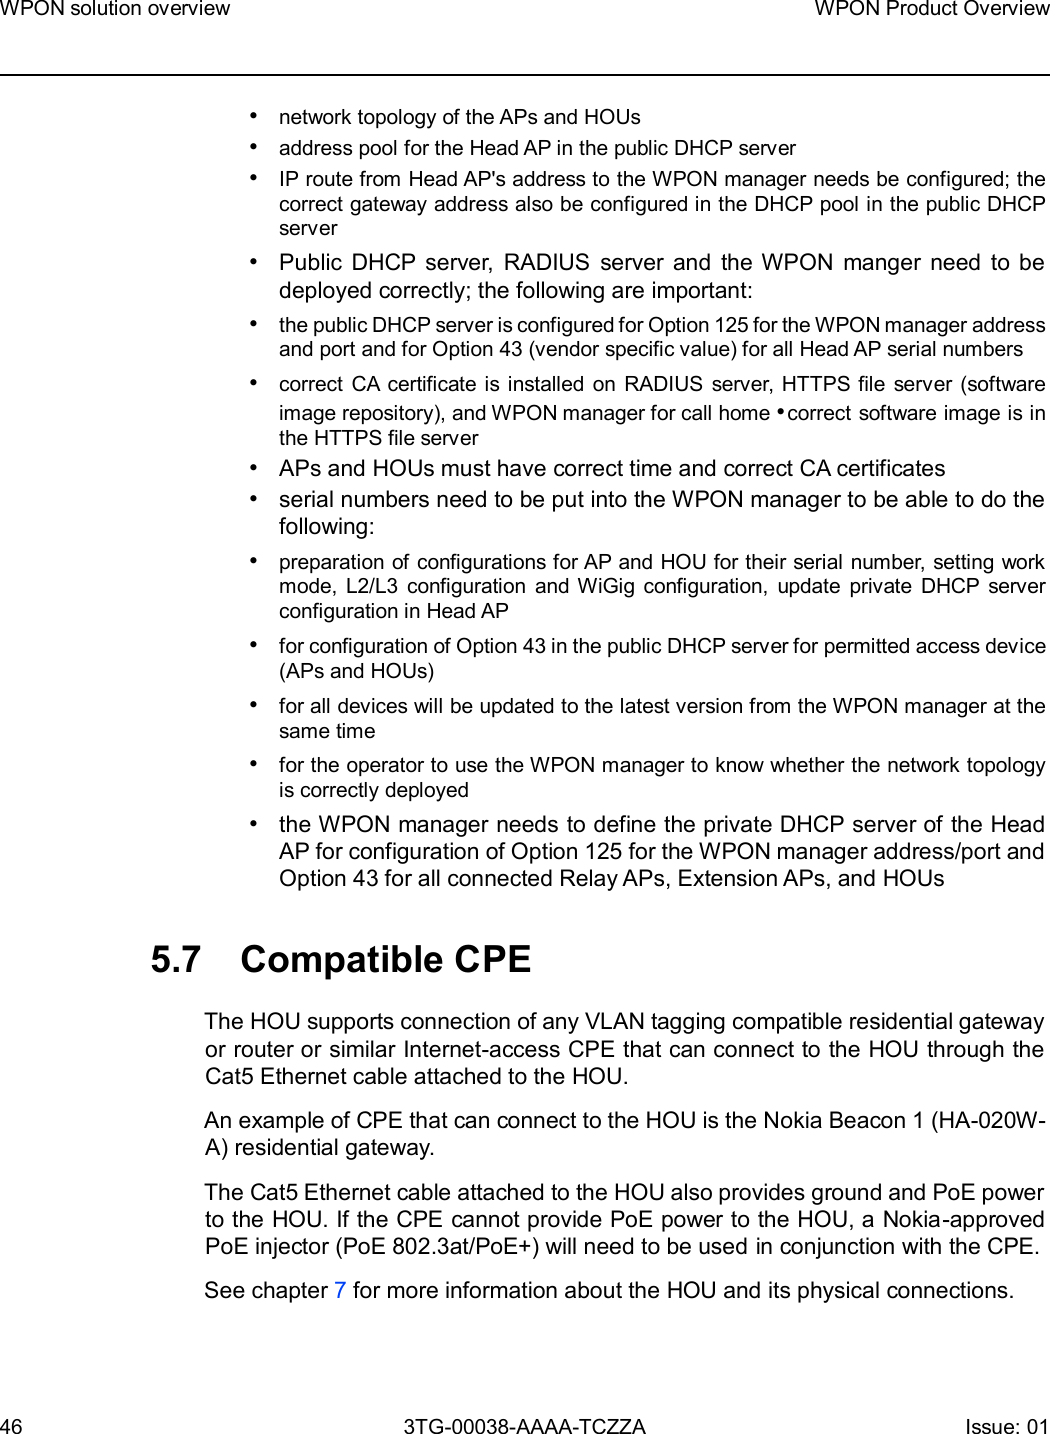 Page 46 of Nokia Bell 7577WPONAPAC WPON User Manual WPON Product Overview